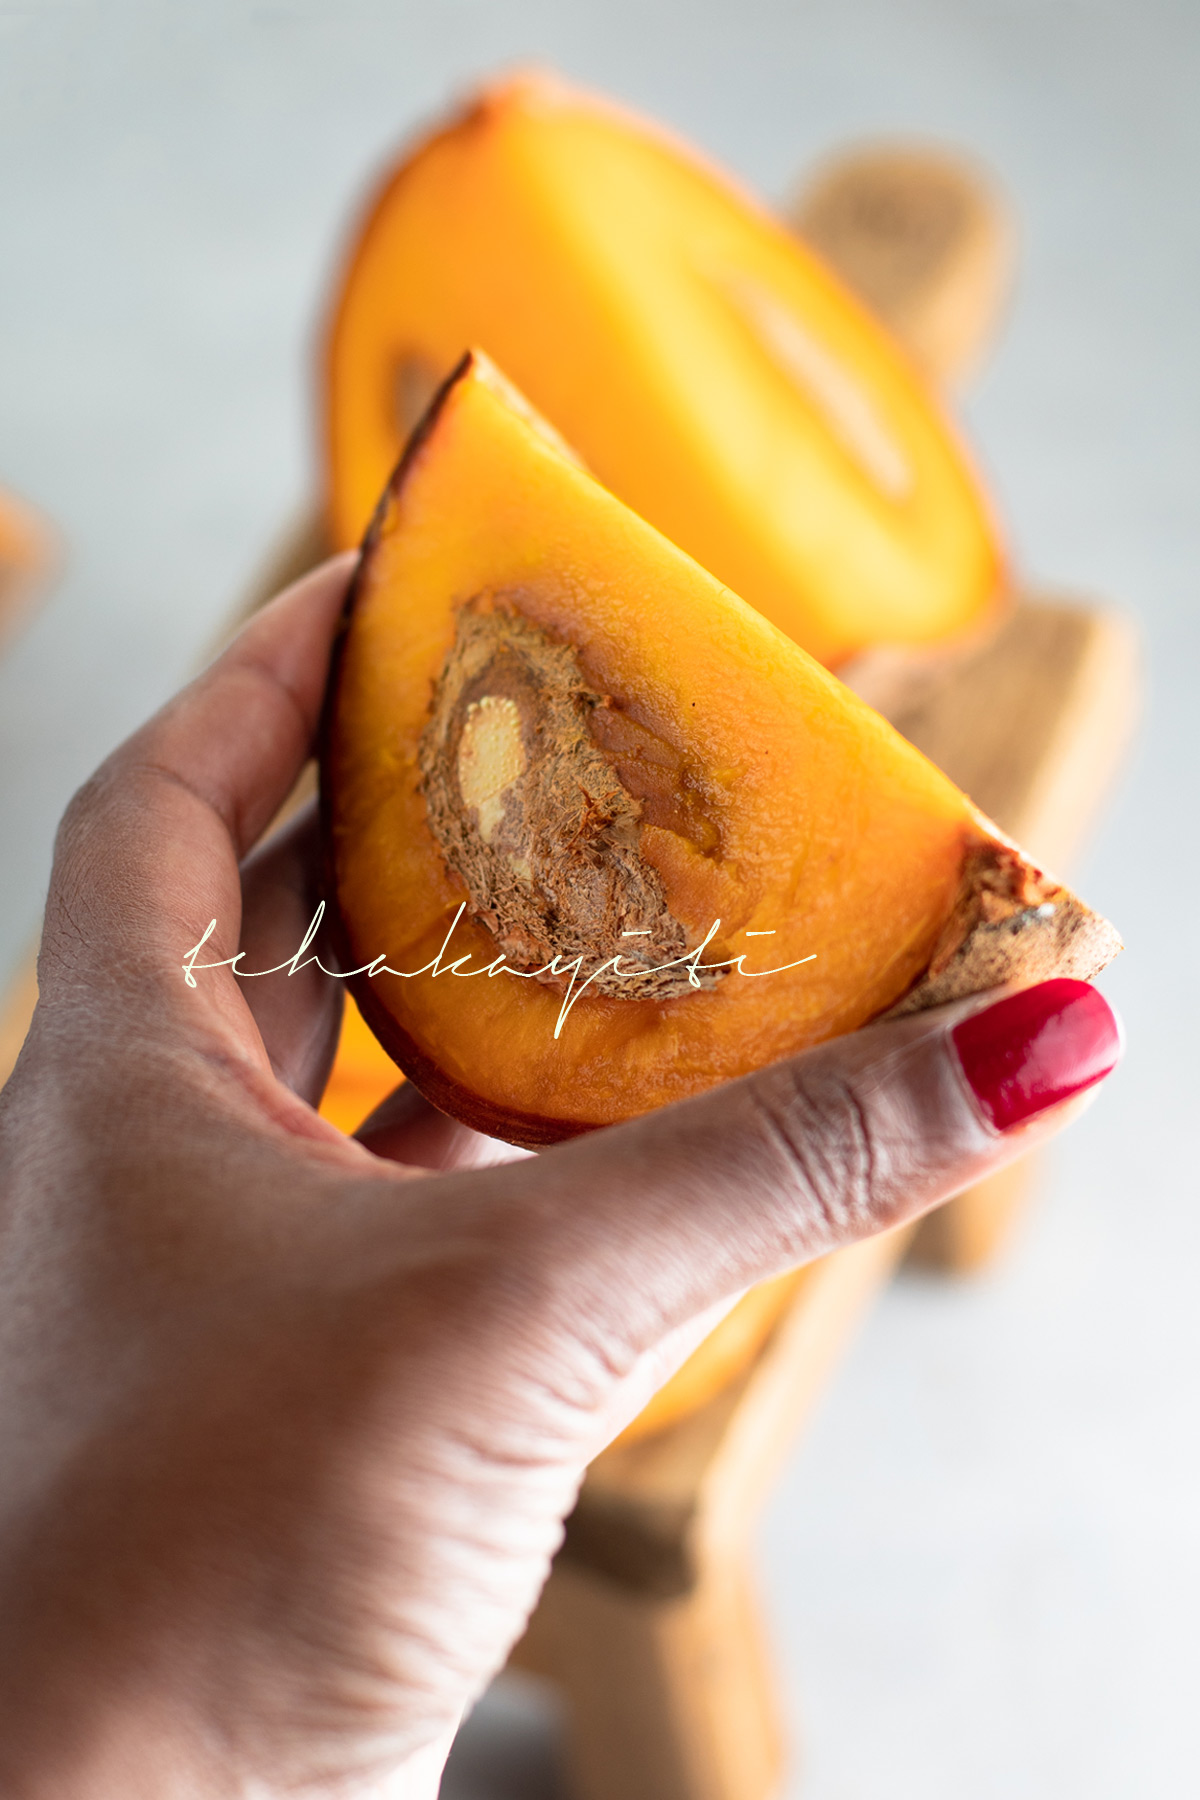 A Caribbean Apricot, mamey, will brighten your day and palate during the early summer days. | tchakayiti.com